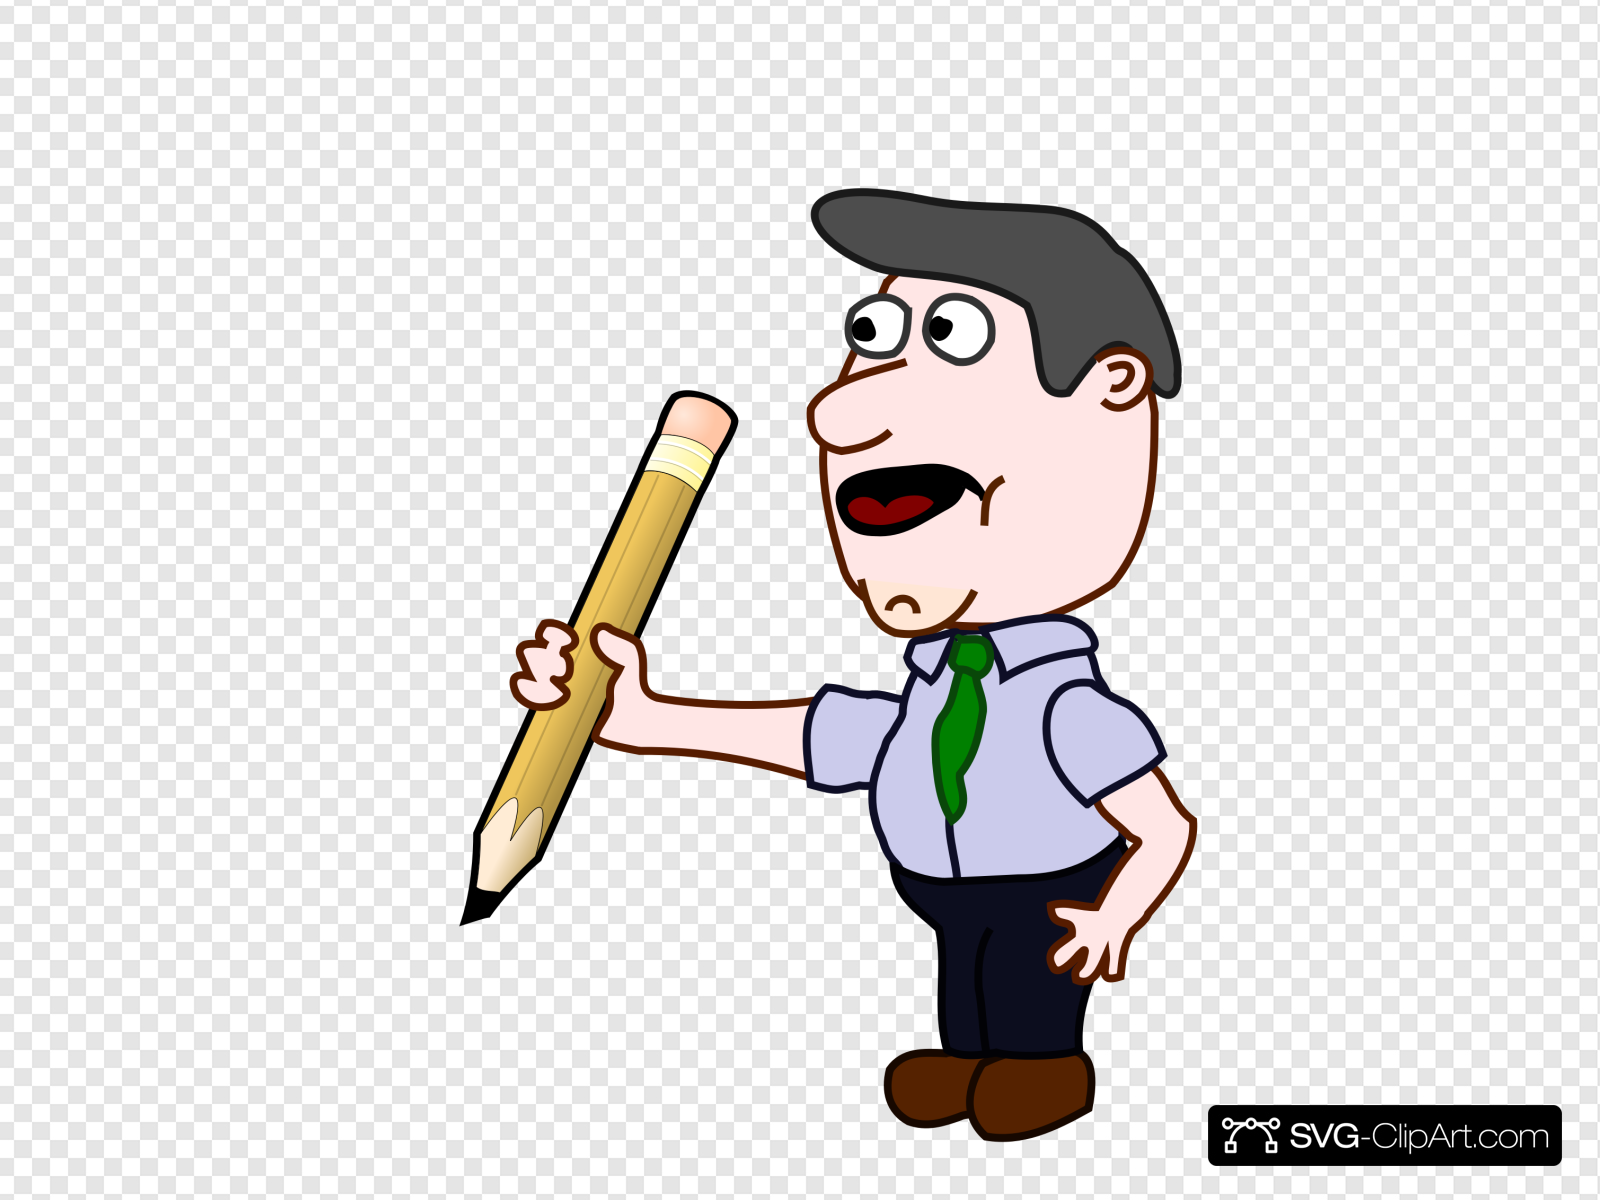 Man Holding Pencil Clip art, Icon and SVG.